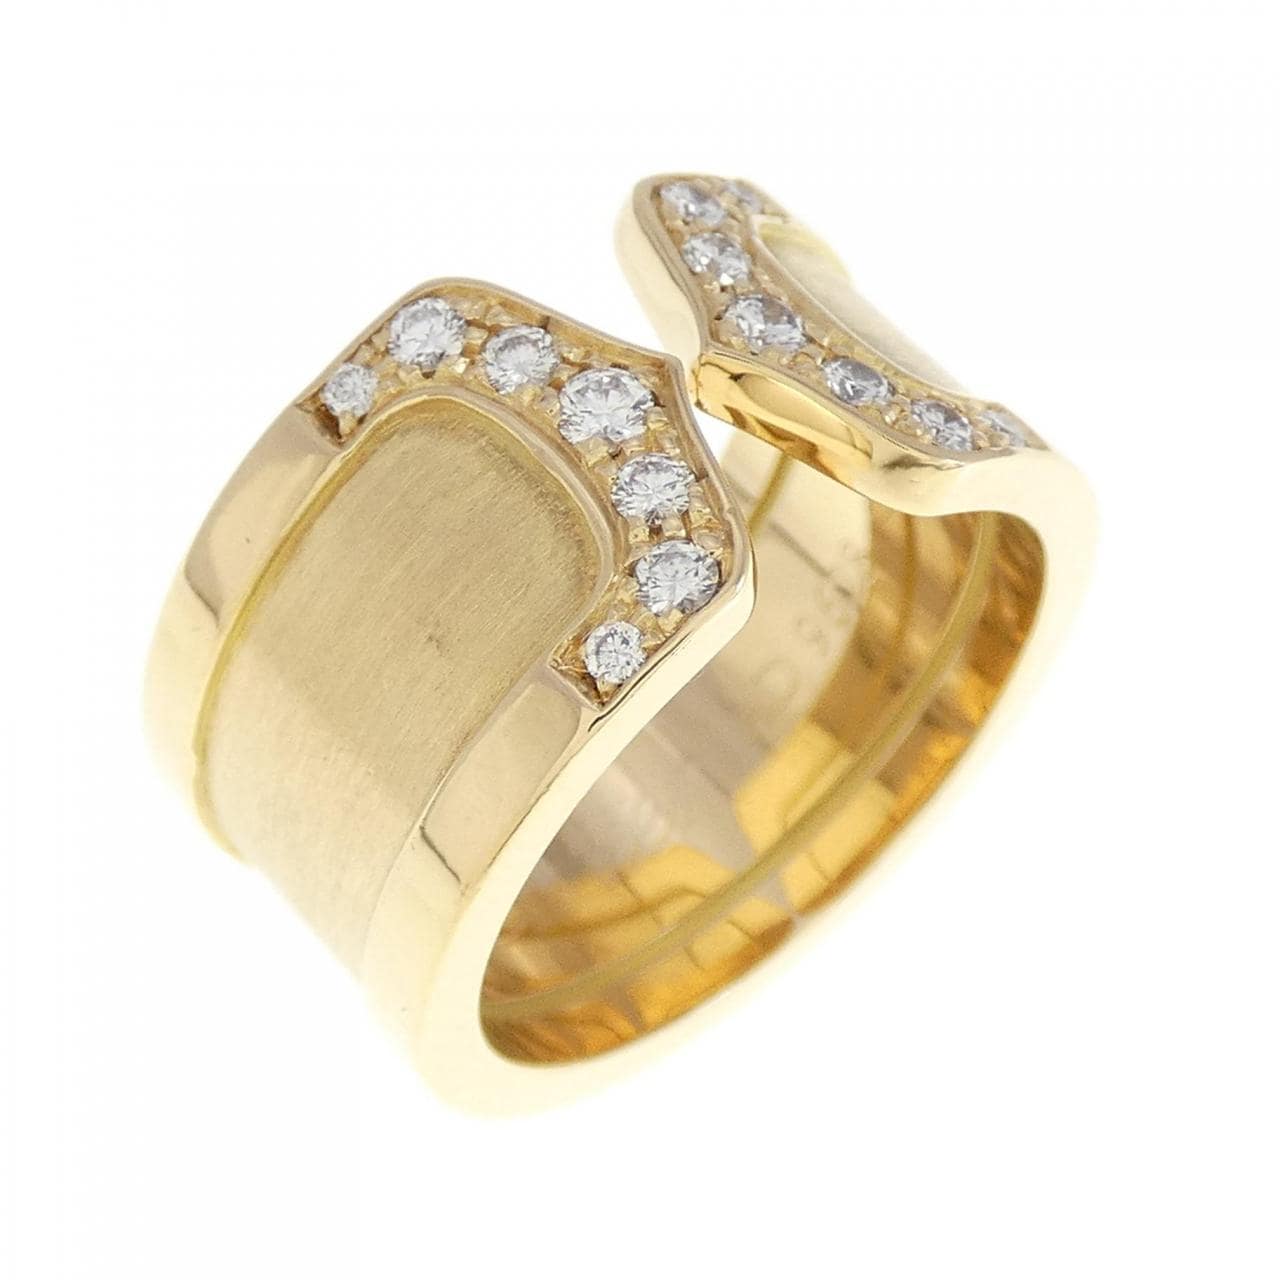 Cartier C2 Large Ring